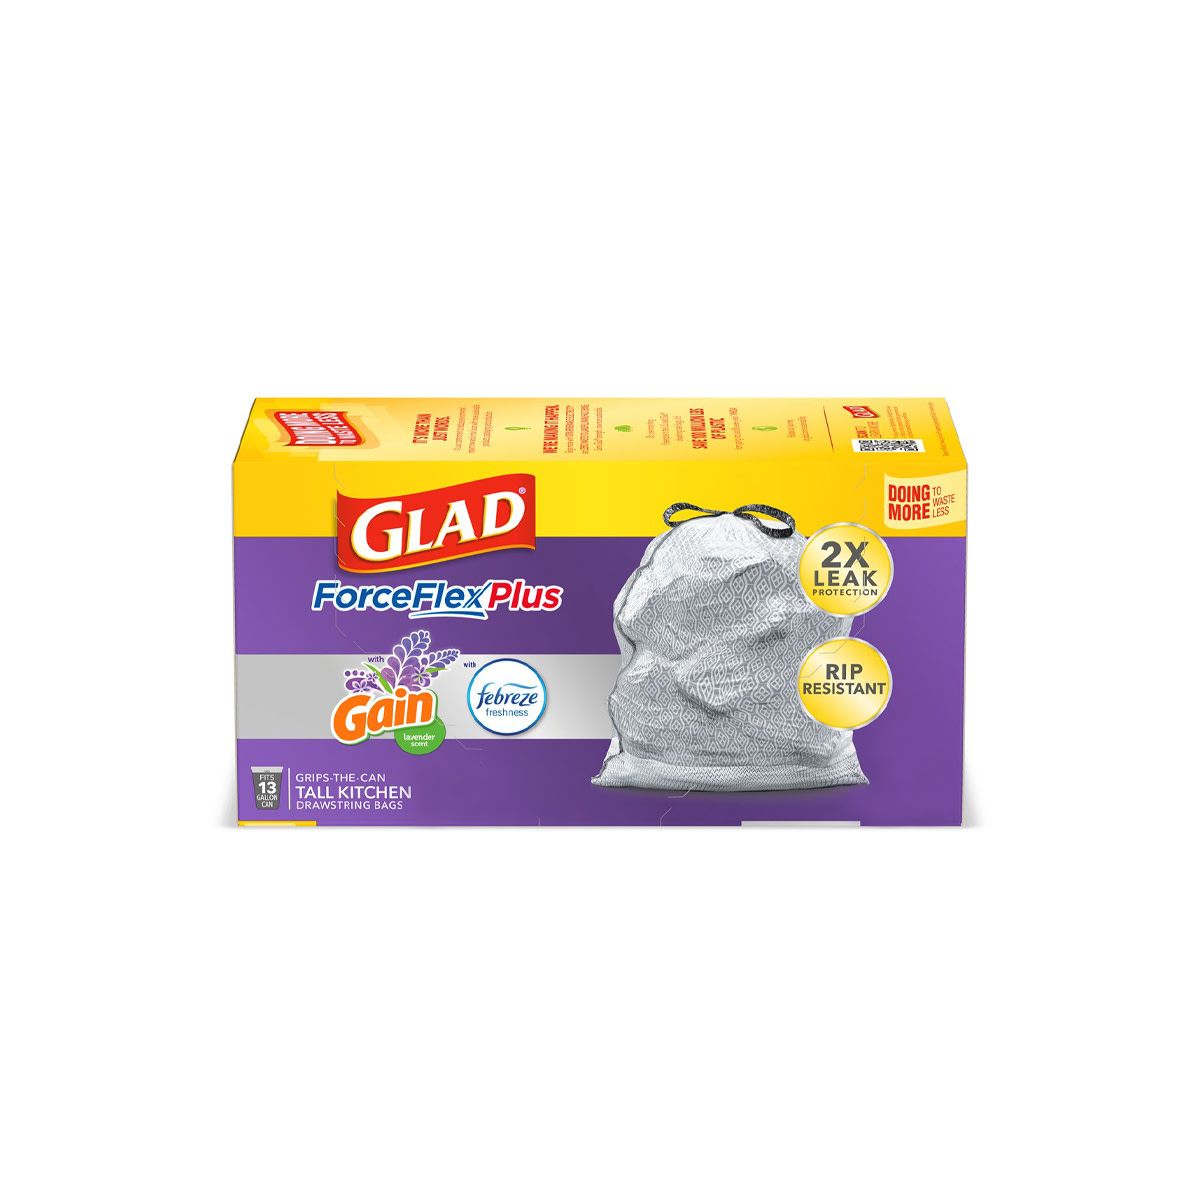 Pack of Glad ForceFlexPlus Trash Bags with Gain Lavender Scent